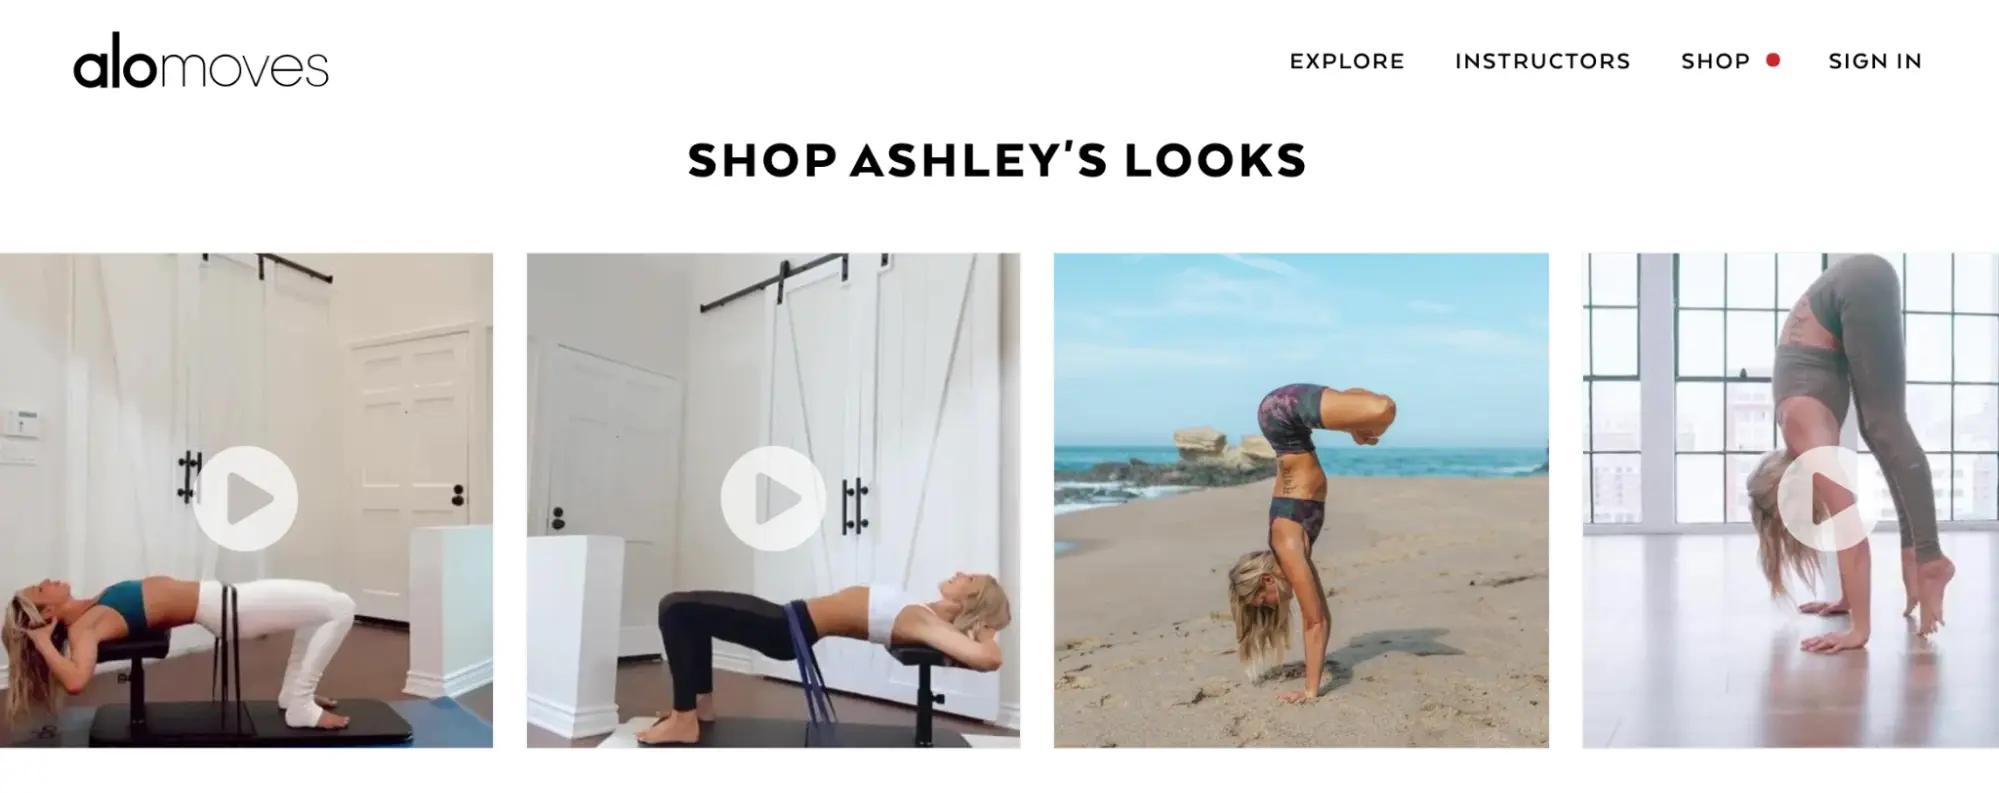 Screenshot of shoppable influencer content on Alo Yoga website